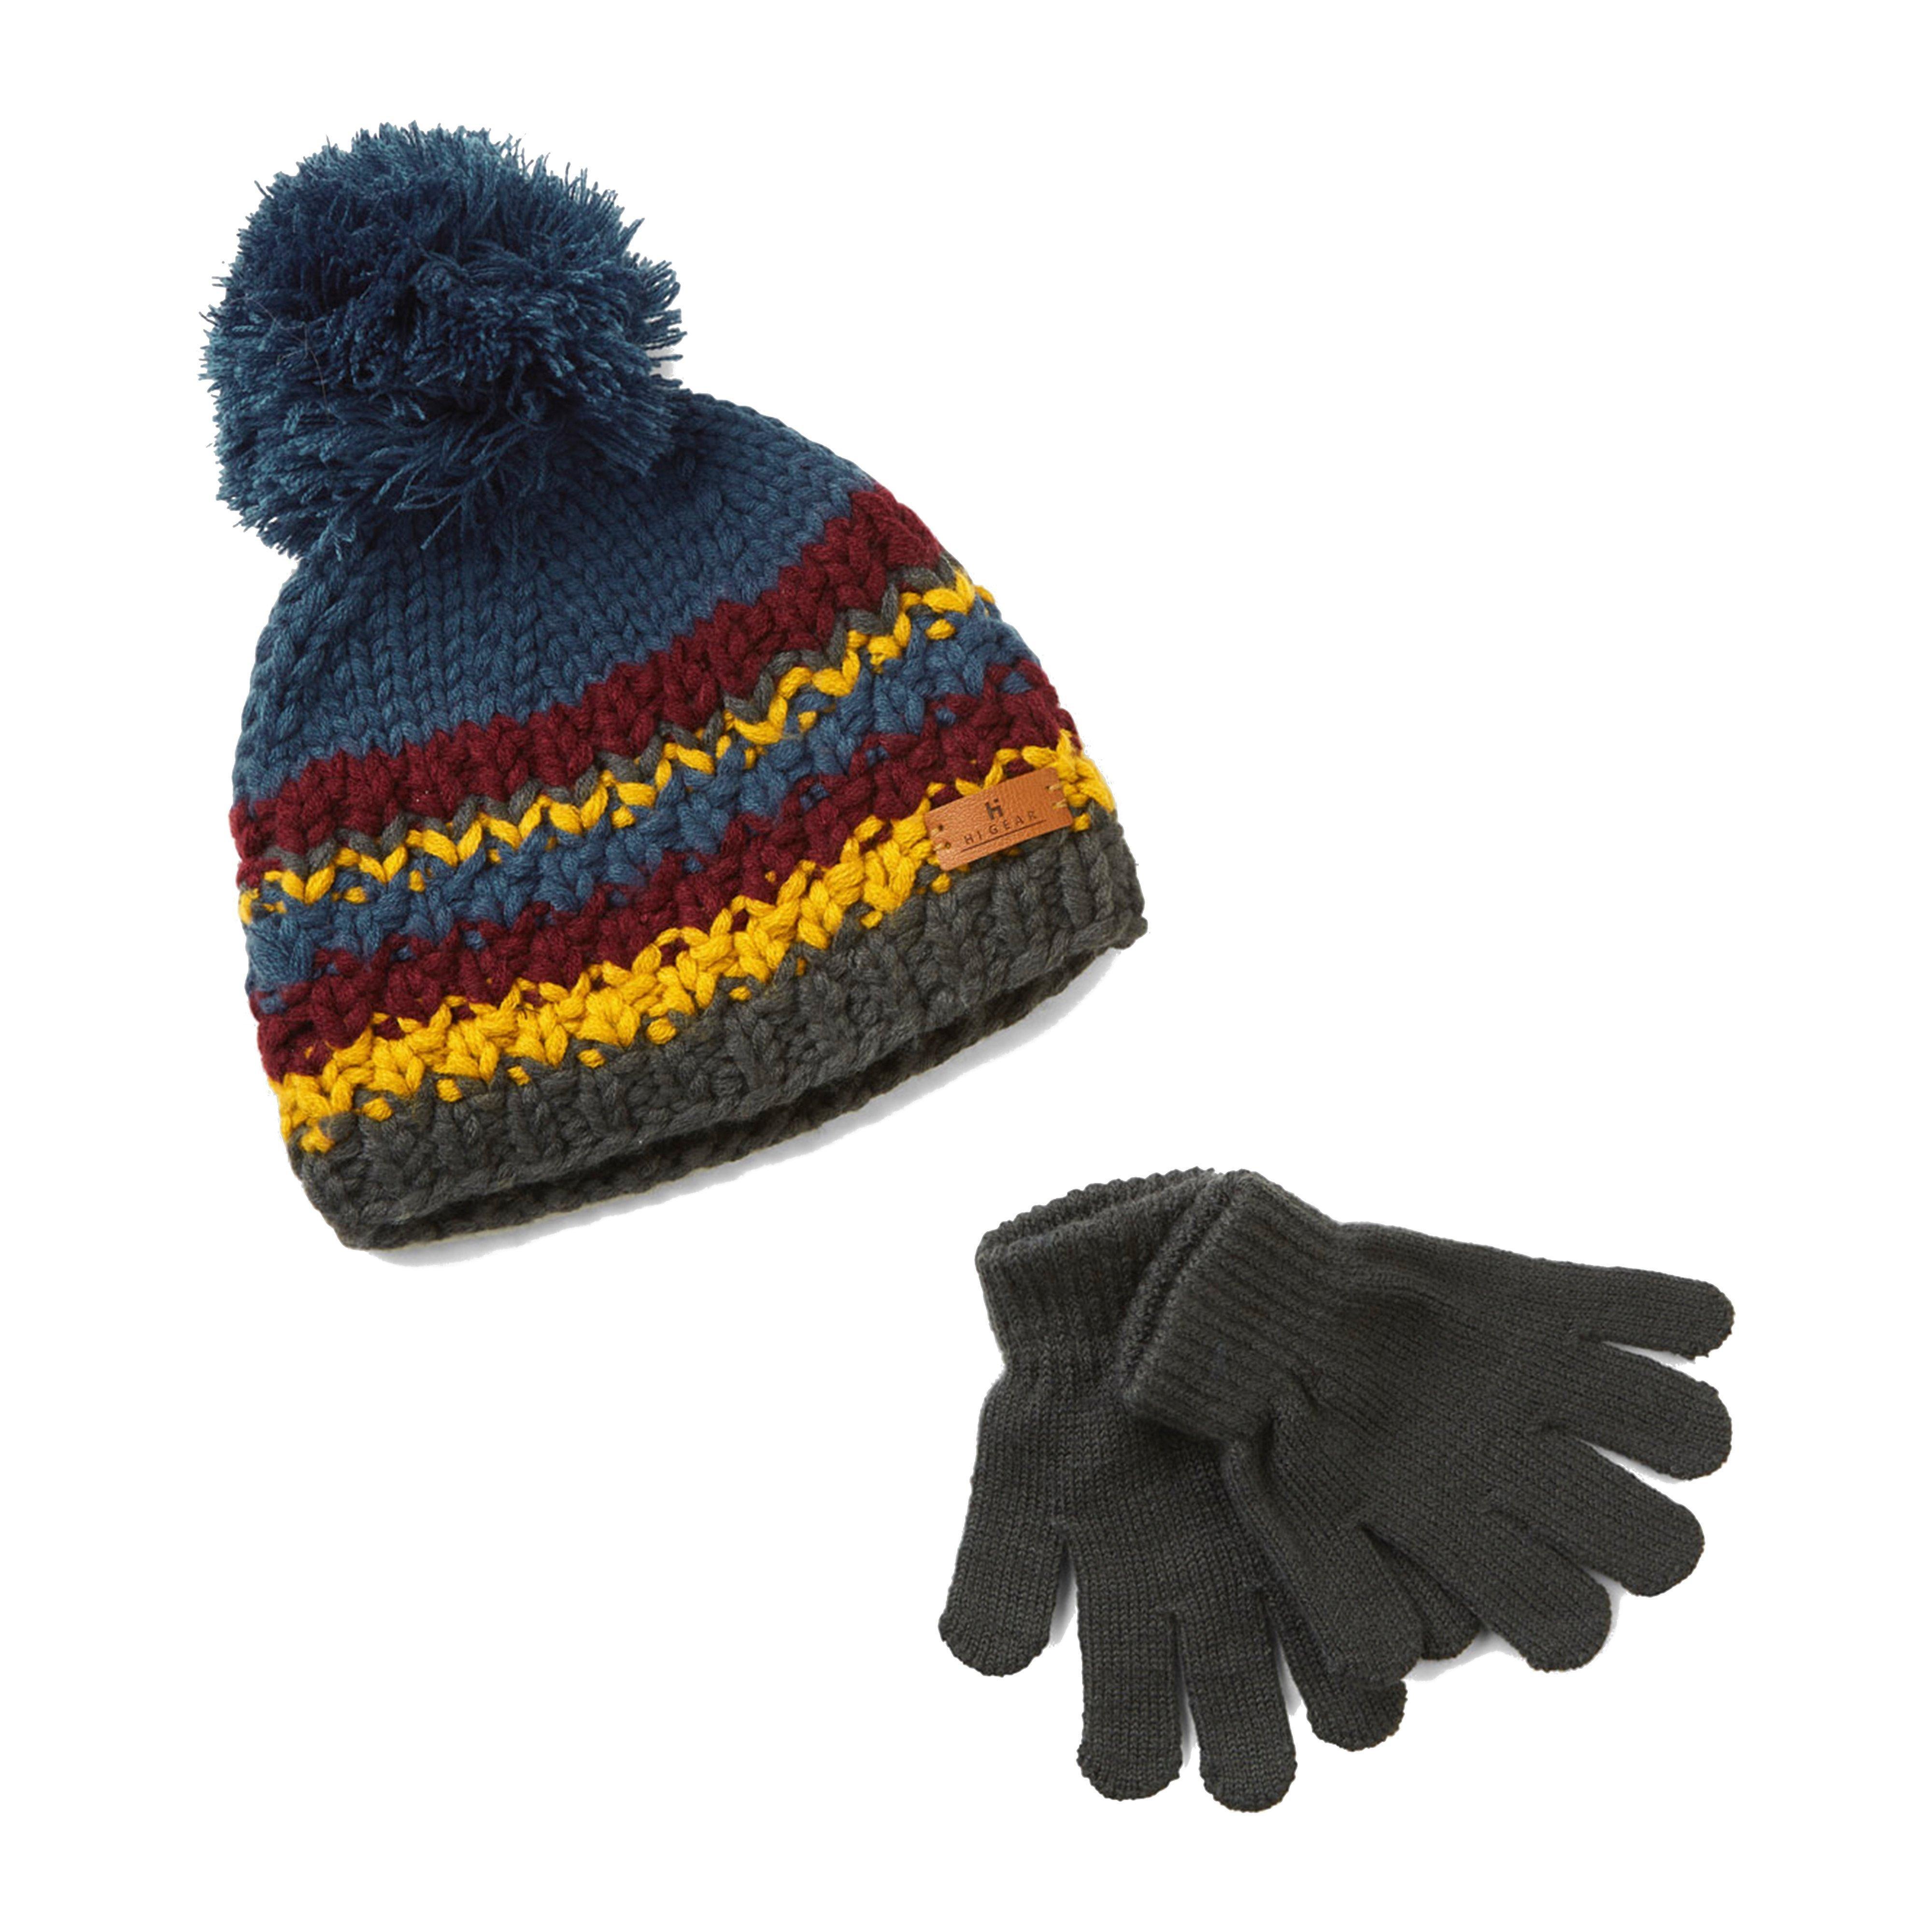 Hi-Gear Kids' Hat and Glove Set Review